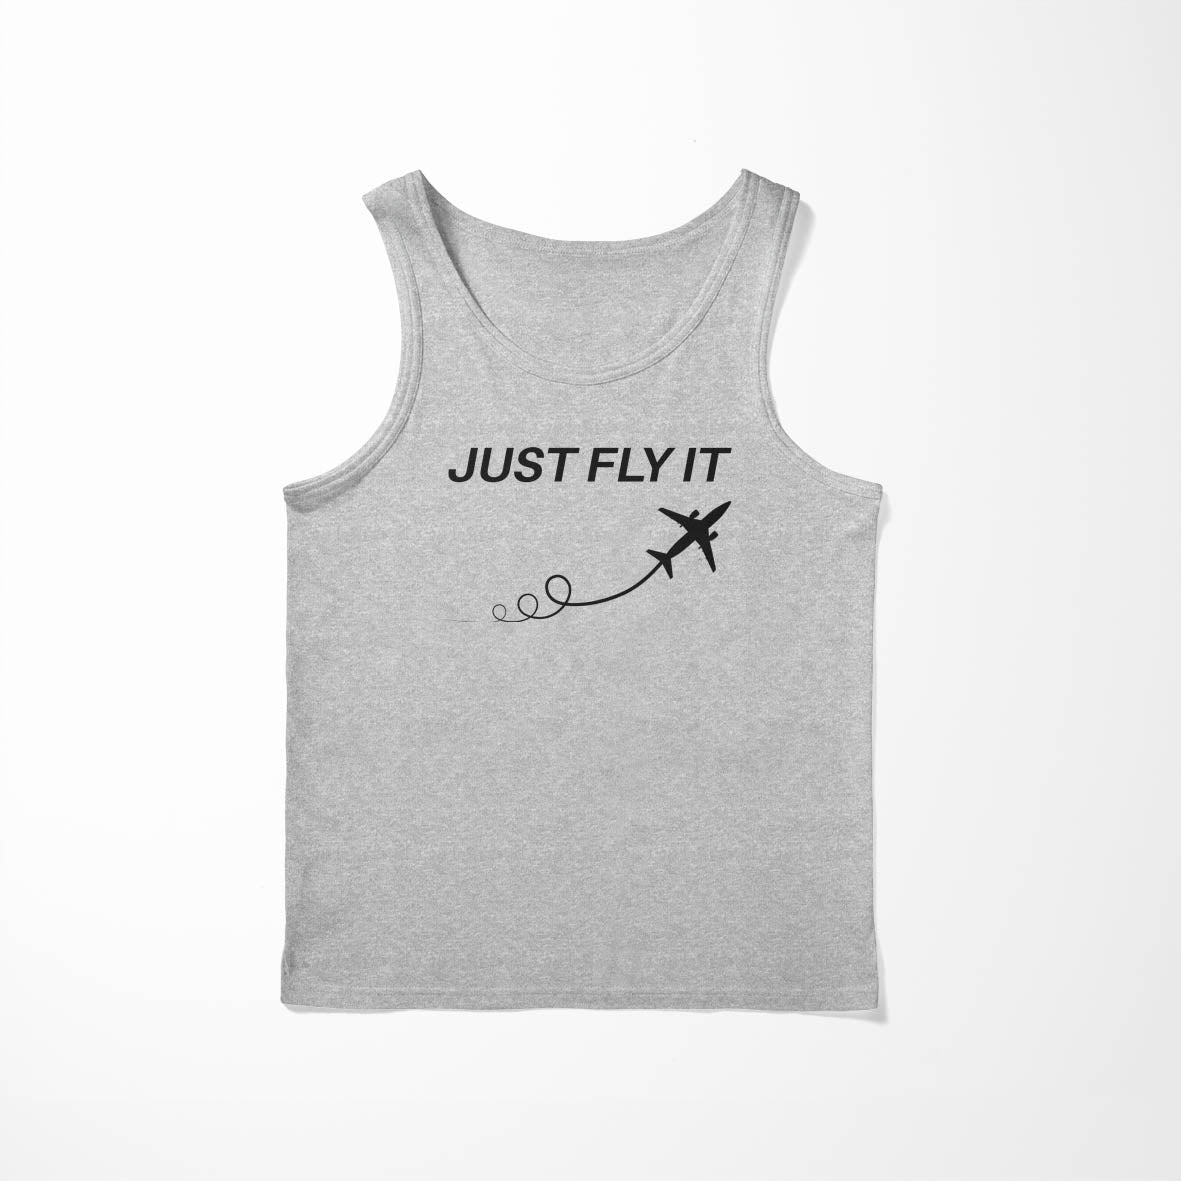 Just Fly It Designed Tank Tops